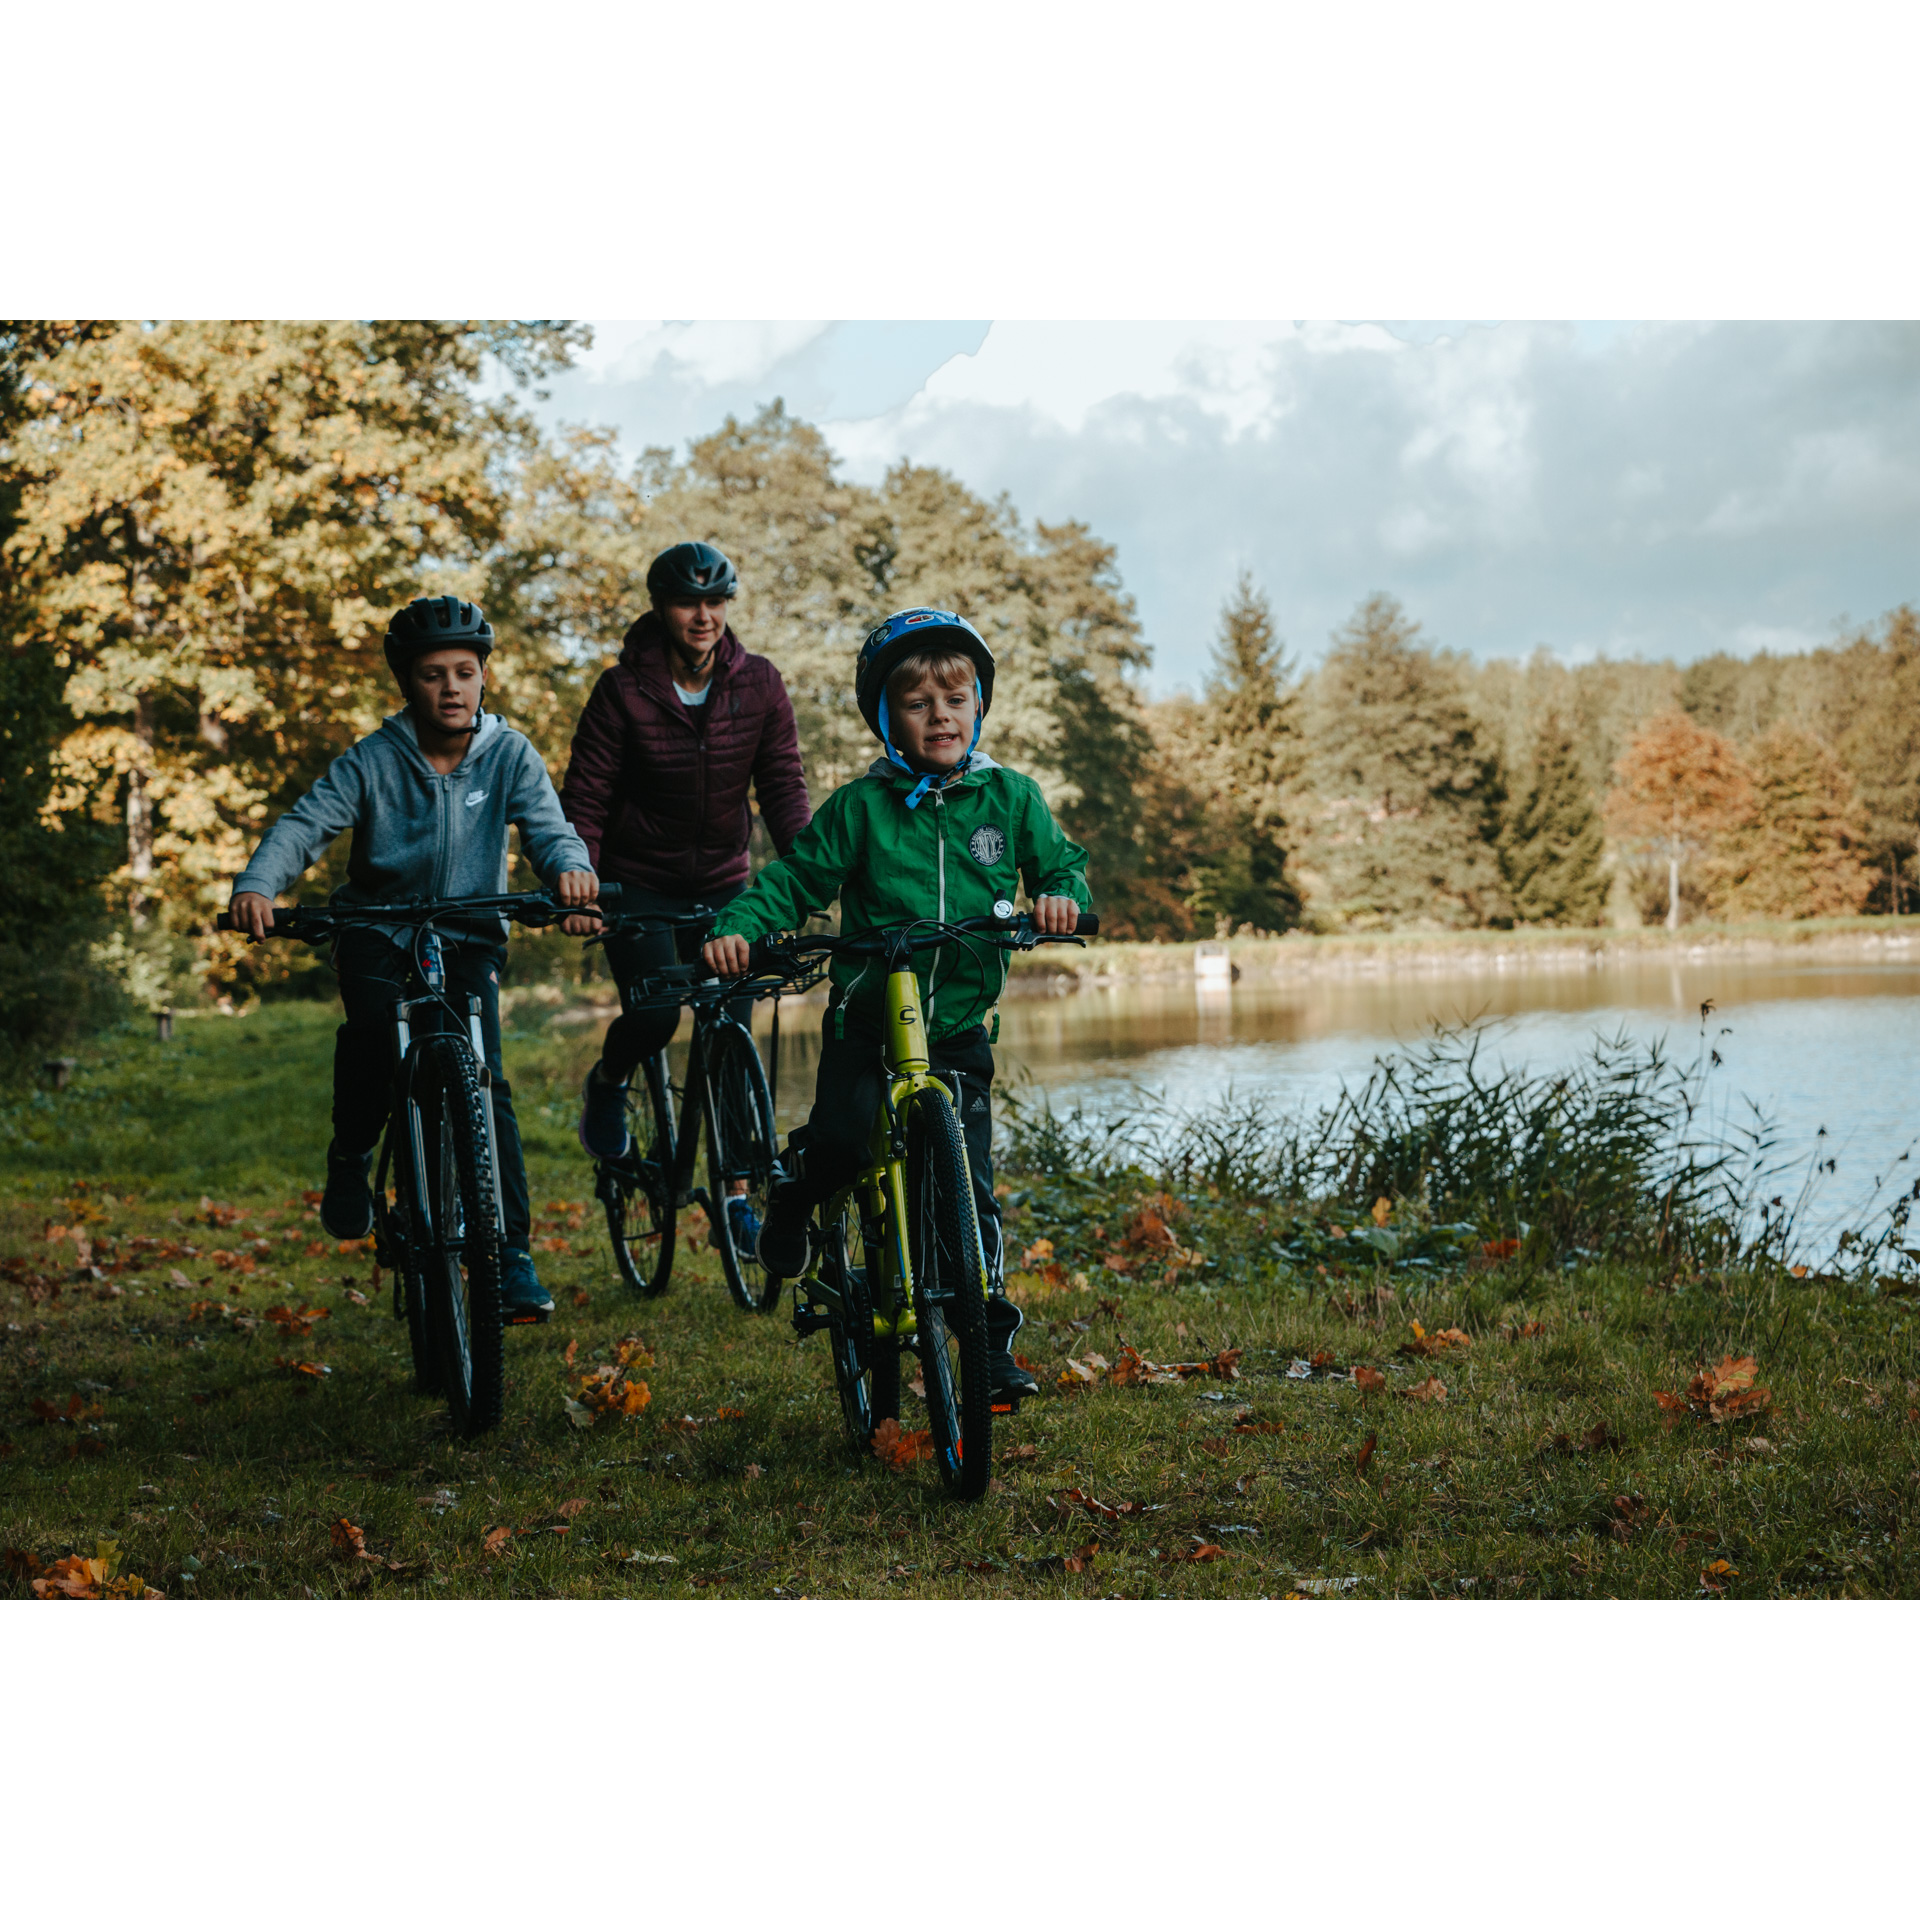 Two boys and a woman cycling on the grass along the water, with trees in the background